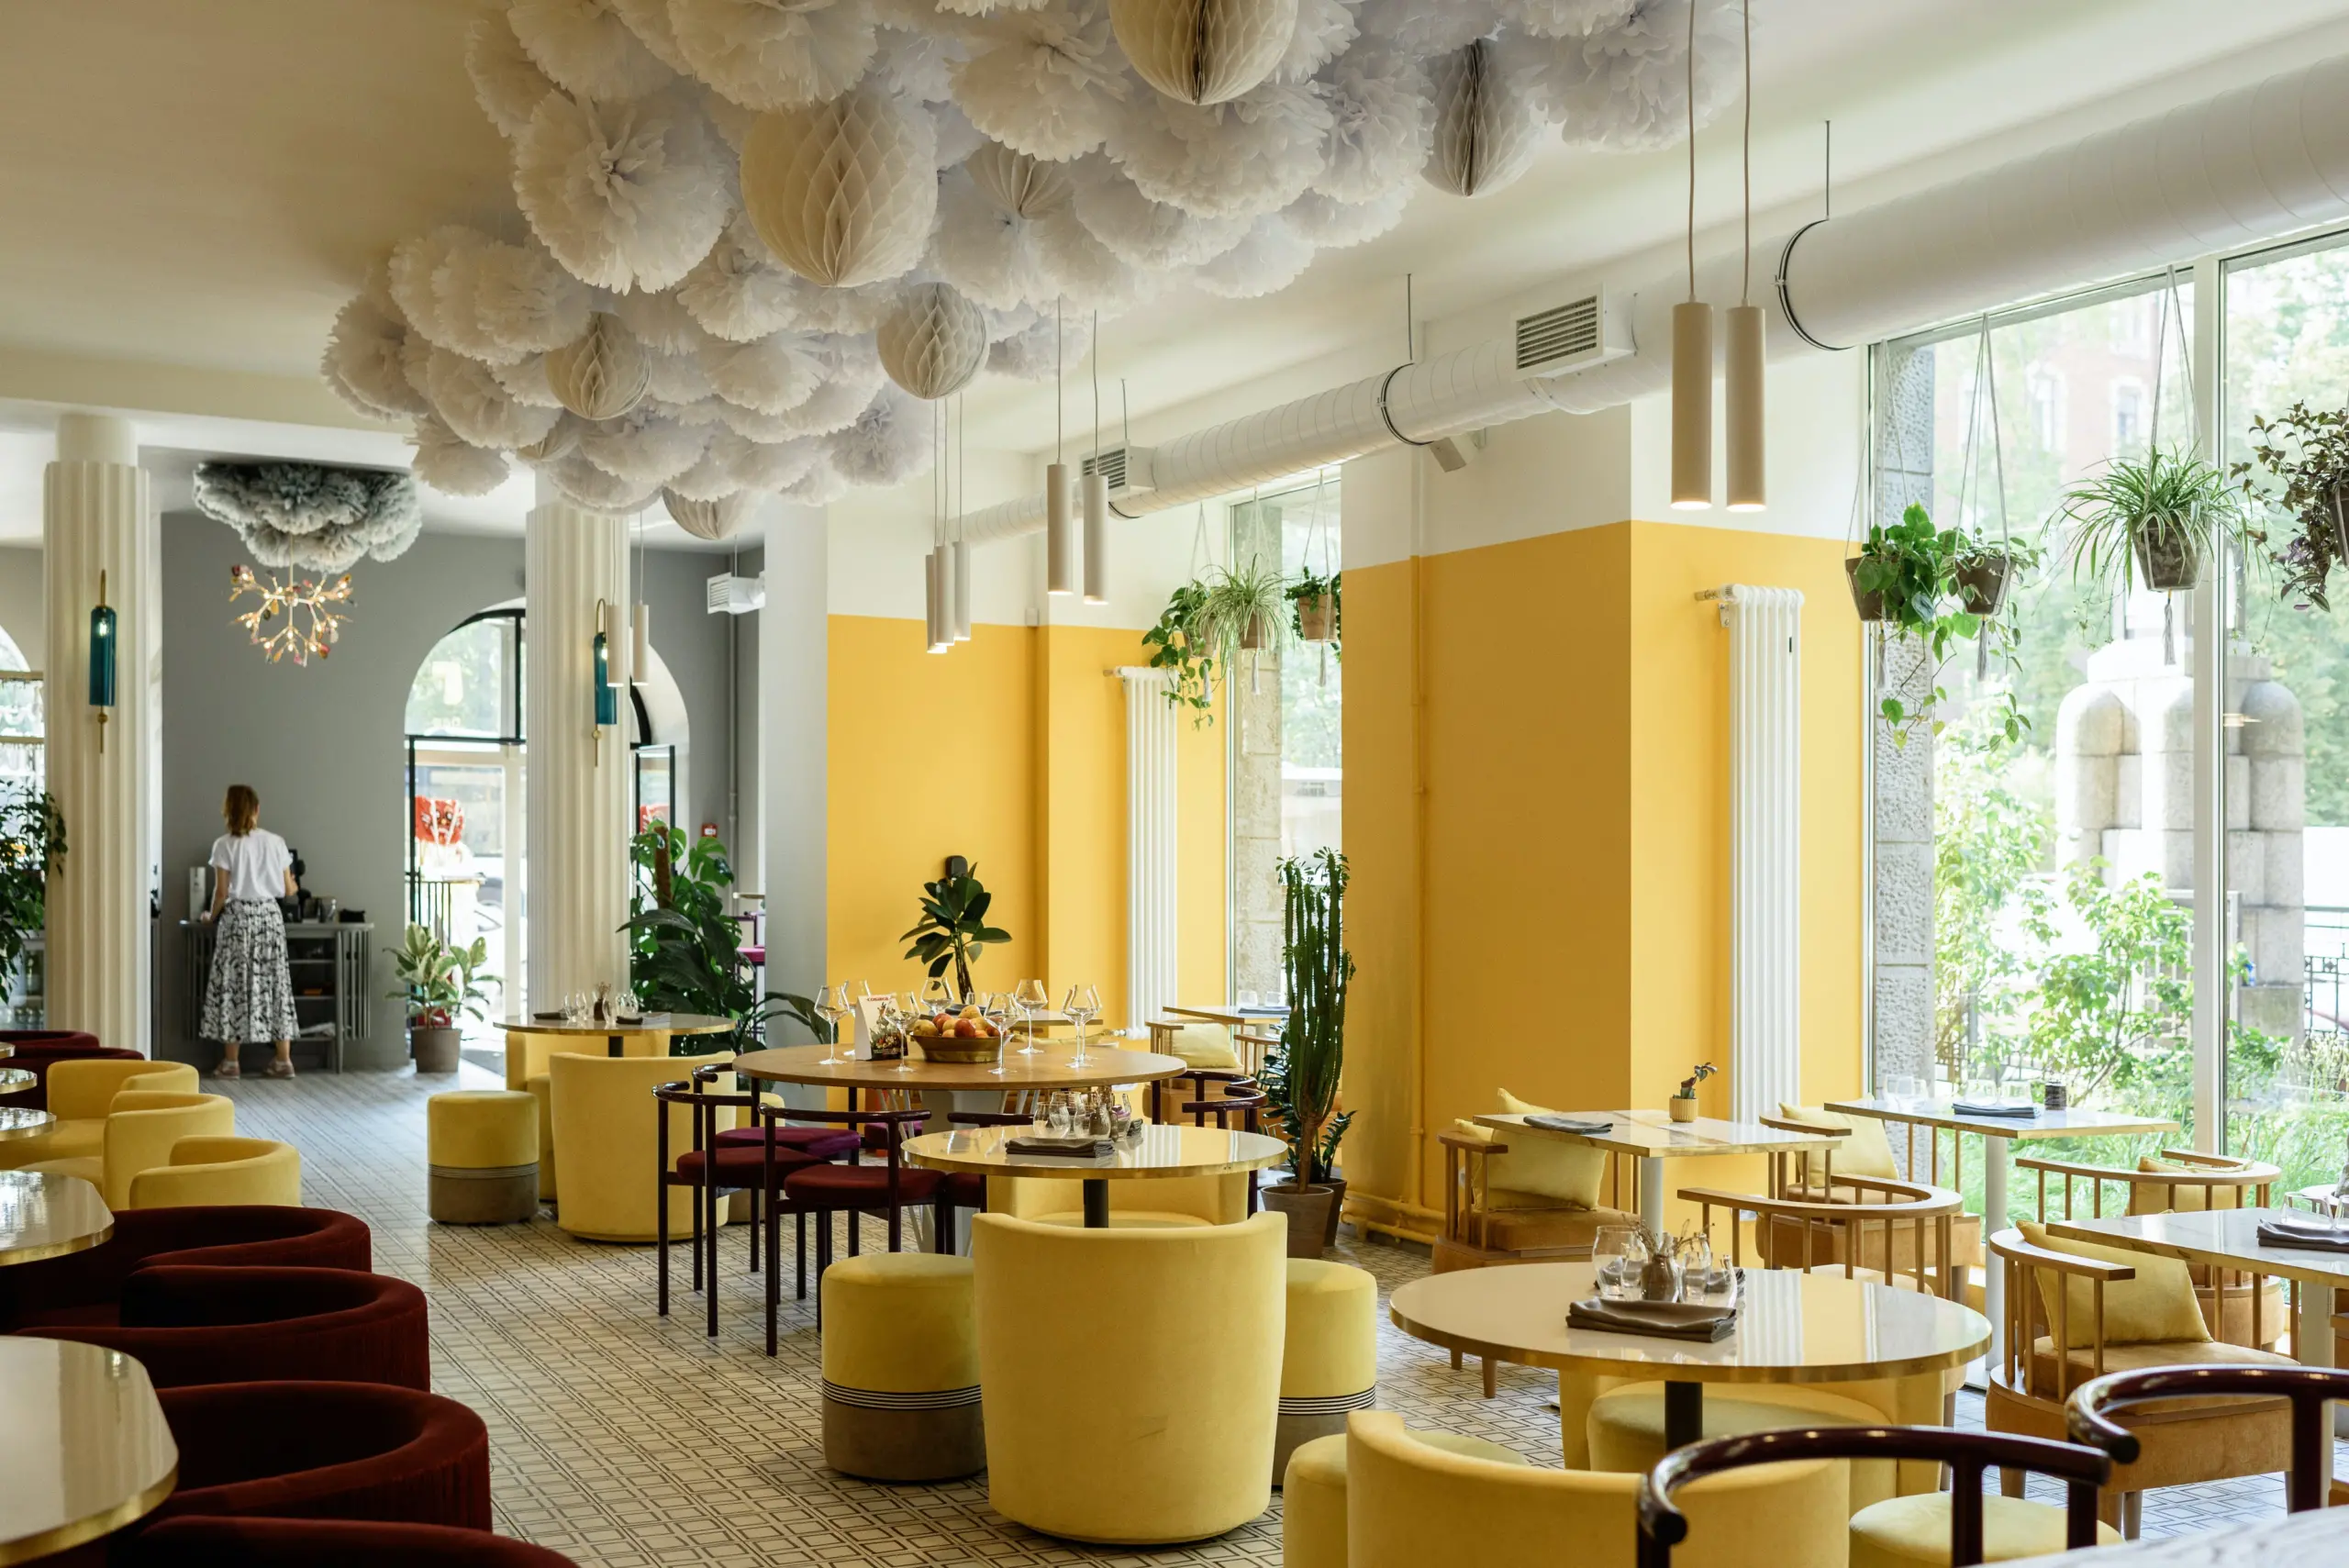 restaurant contract furniture with yellow lounge seating and yellow and white walls.